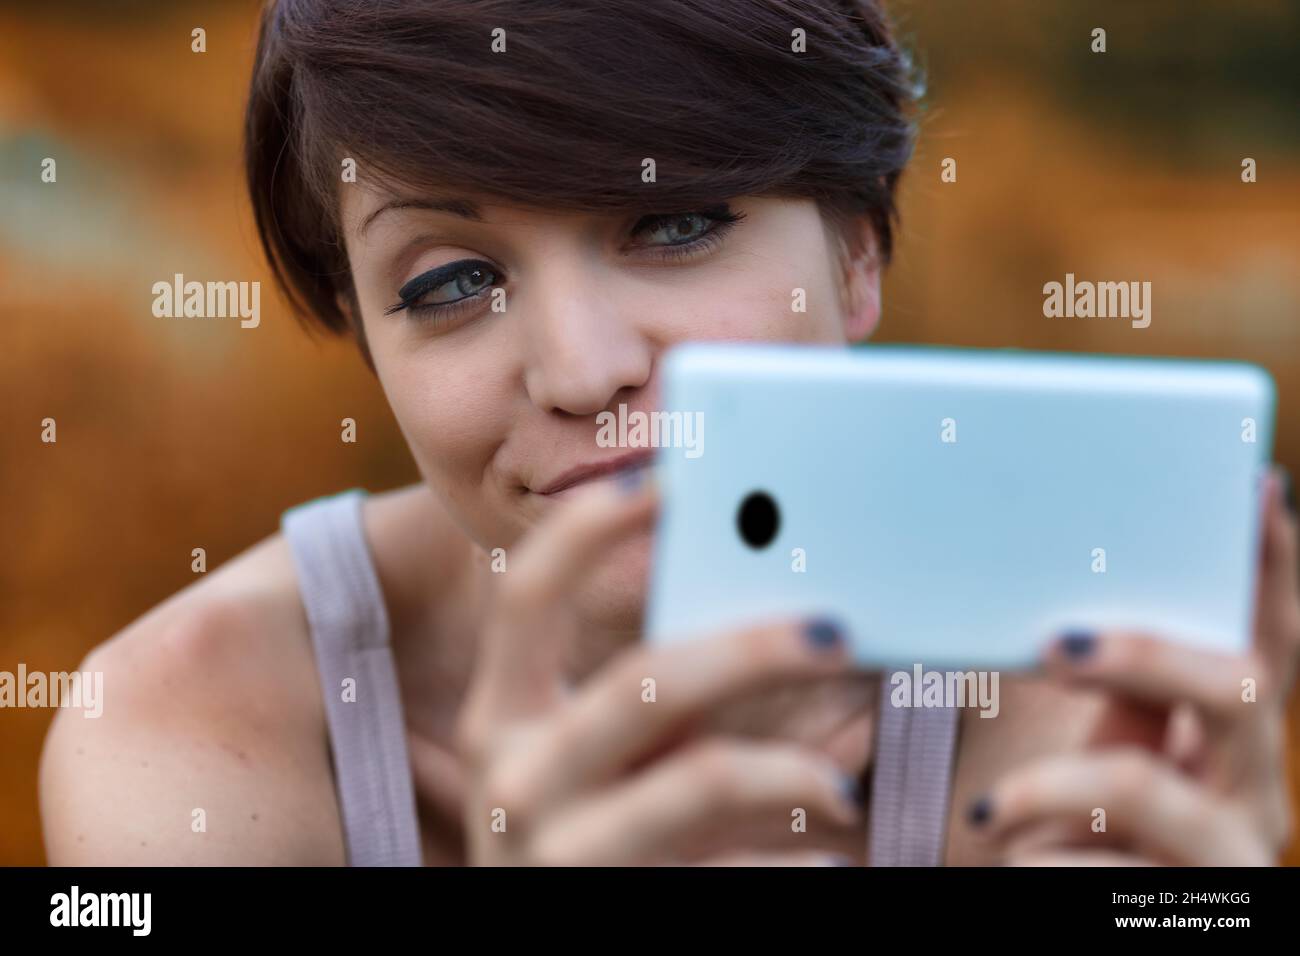 Sceptical young woman looking at her mobile phone with a wry smile and expression of disbelief in a close up cropped portrait Stock Photo